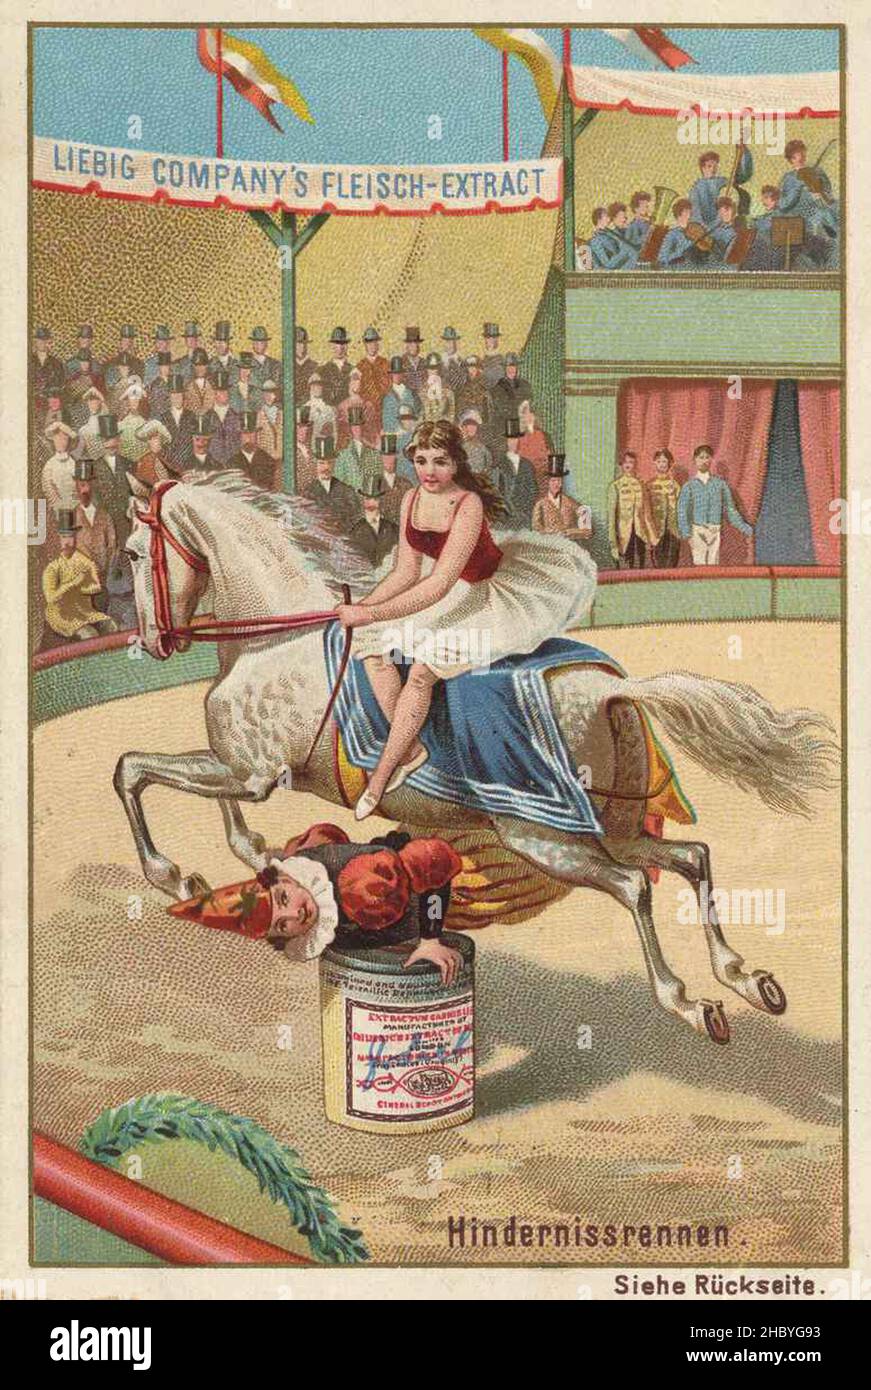 Serie Pferdedressur im Zirkus, Hindernissrennen  /  Series horse dressage in the circus, obstacle racing, Liebigbild, digital improved reproduction of a collectible image from the Liebig company, estimated from 1900, pd  /  digital restaurierte Reproduktion eines Sammelbildes von ca 1900, gemeinfrei, Stock Photo